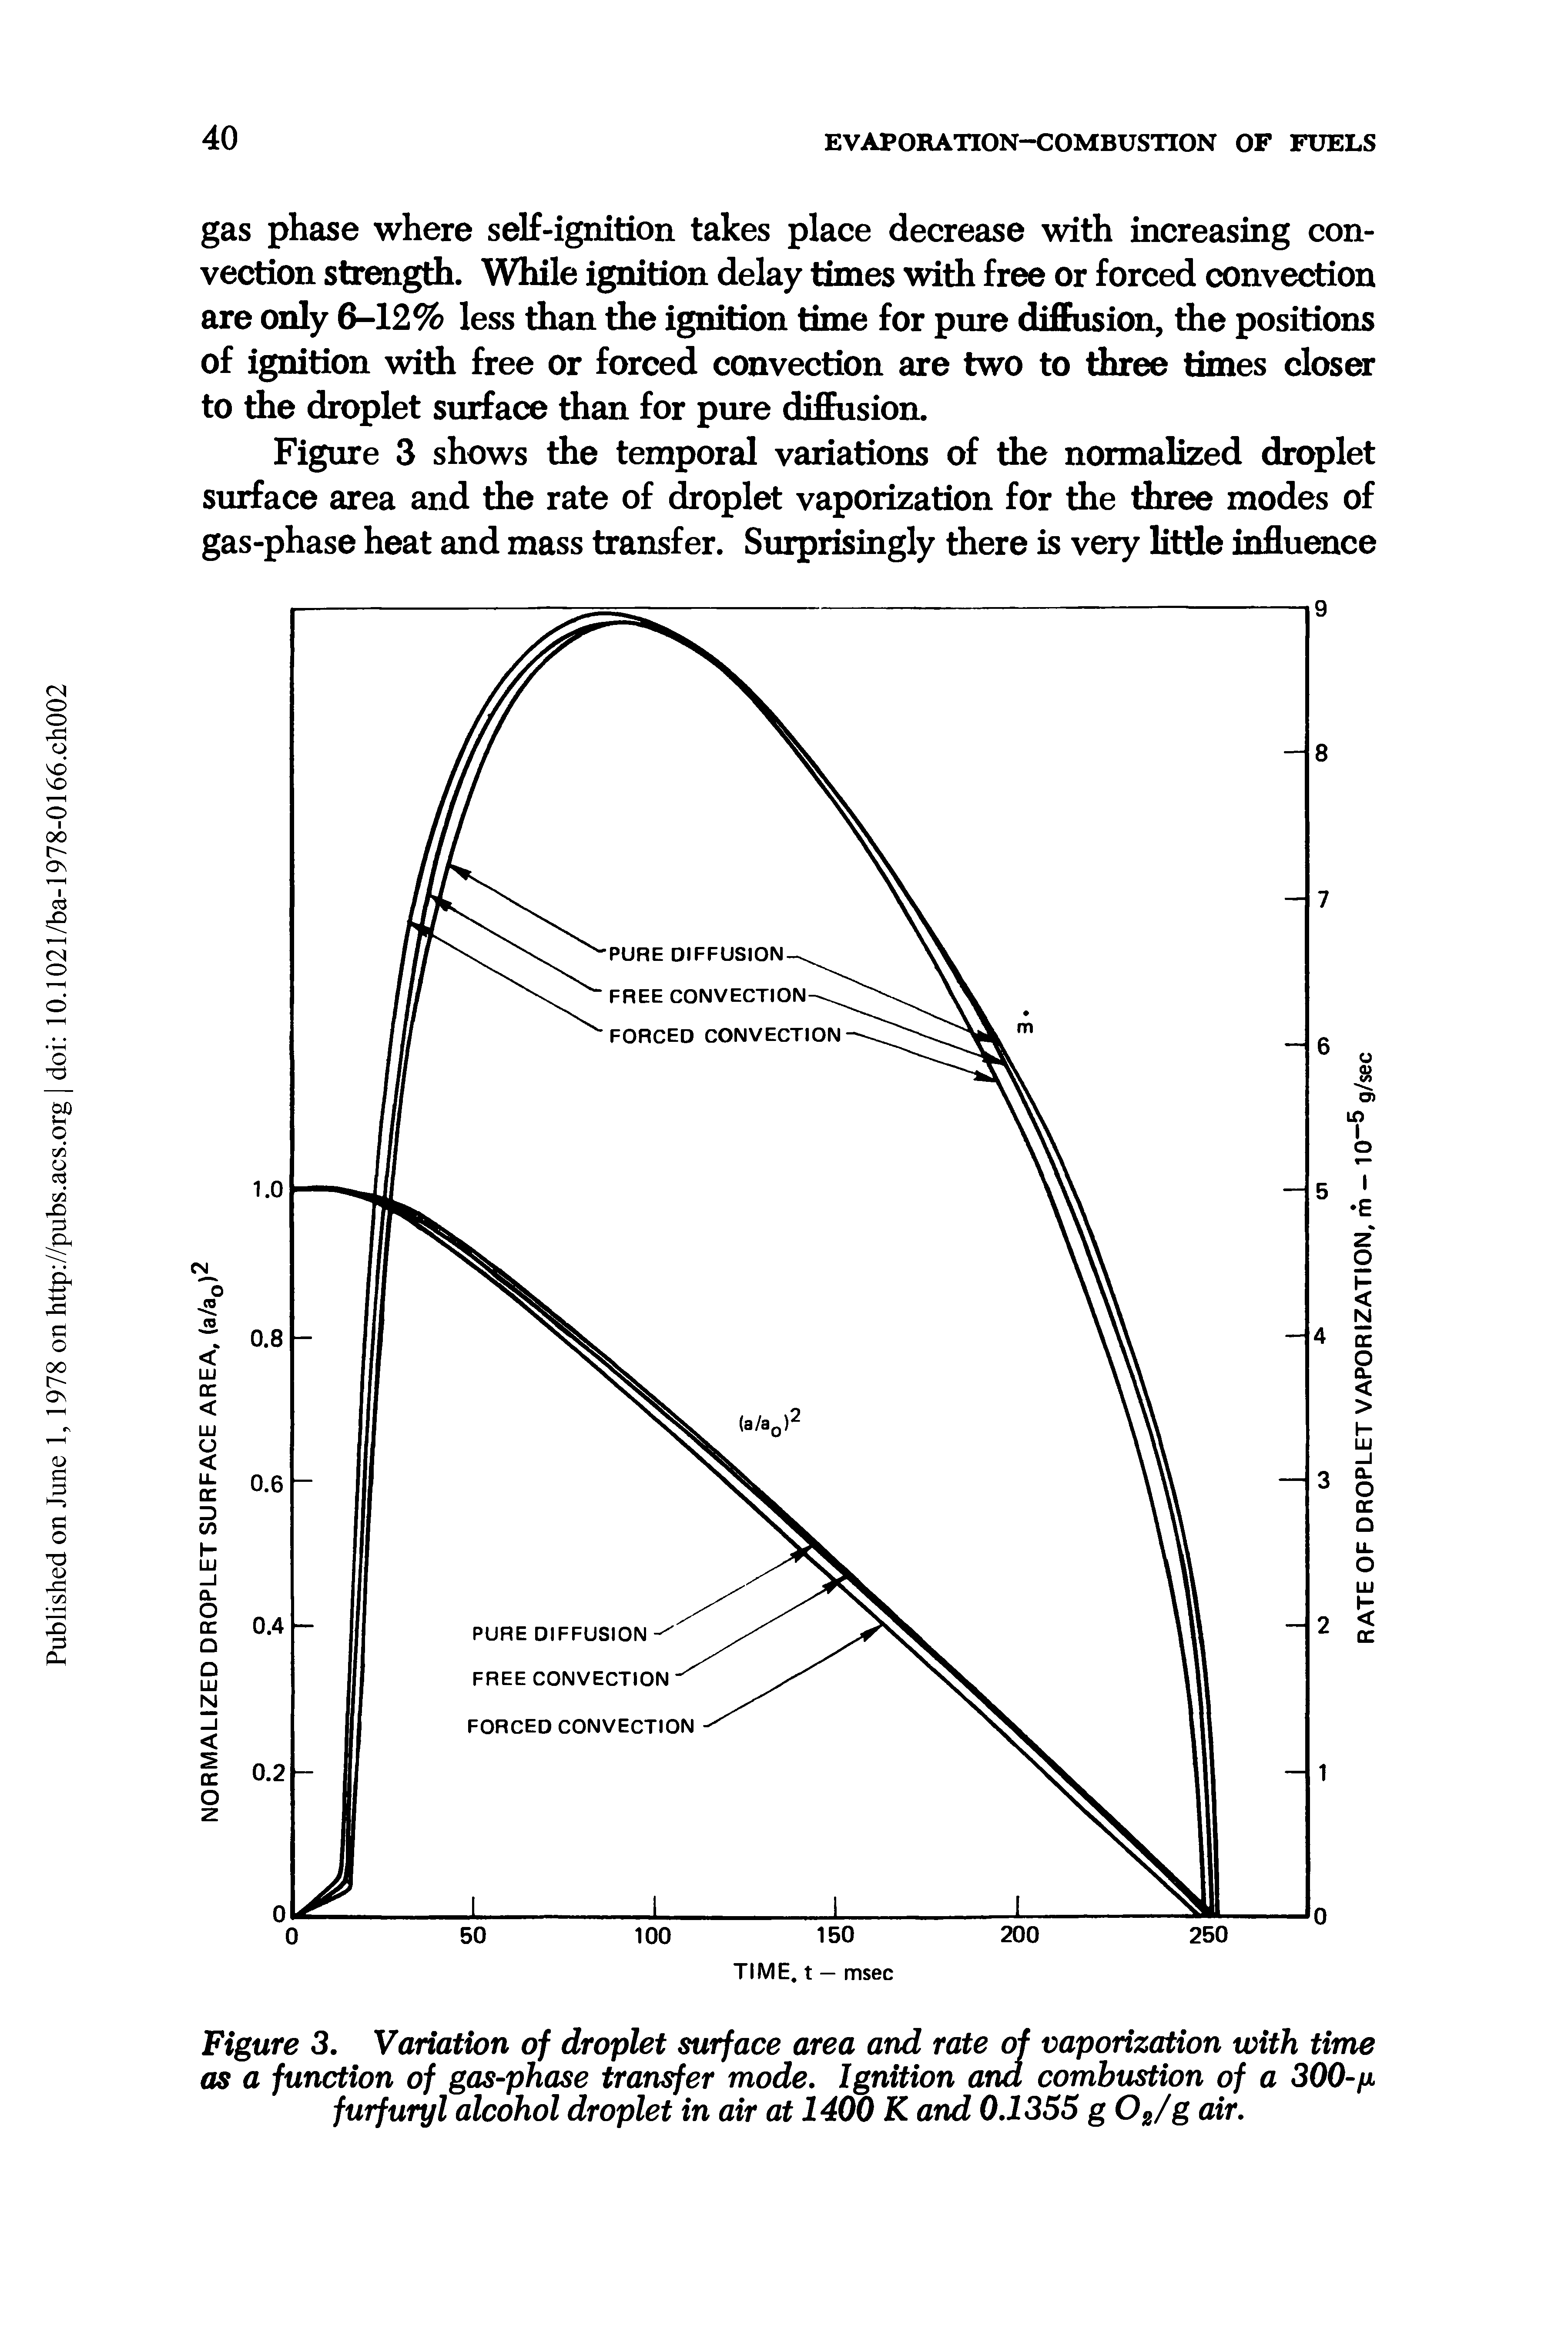 Figure 3. Variation of droplet surface area and rate of vaporization with time as a function of gas-phase transfer mode. Ignition ana combustion of a 300-furfuryl alcohol droplet in air at 1400 K and 0,1355 g Og/g air.